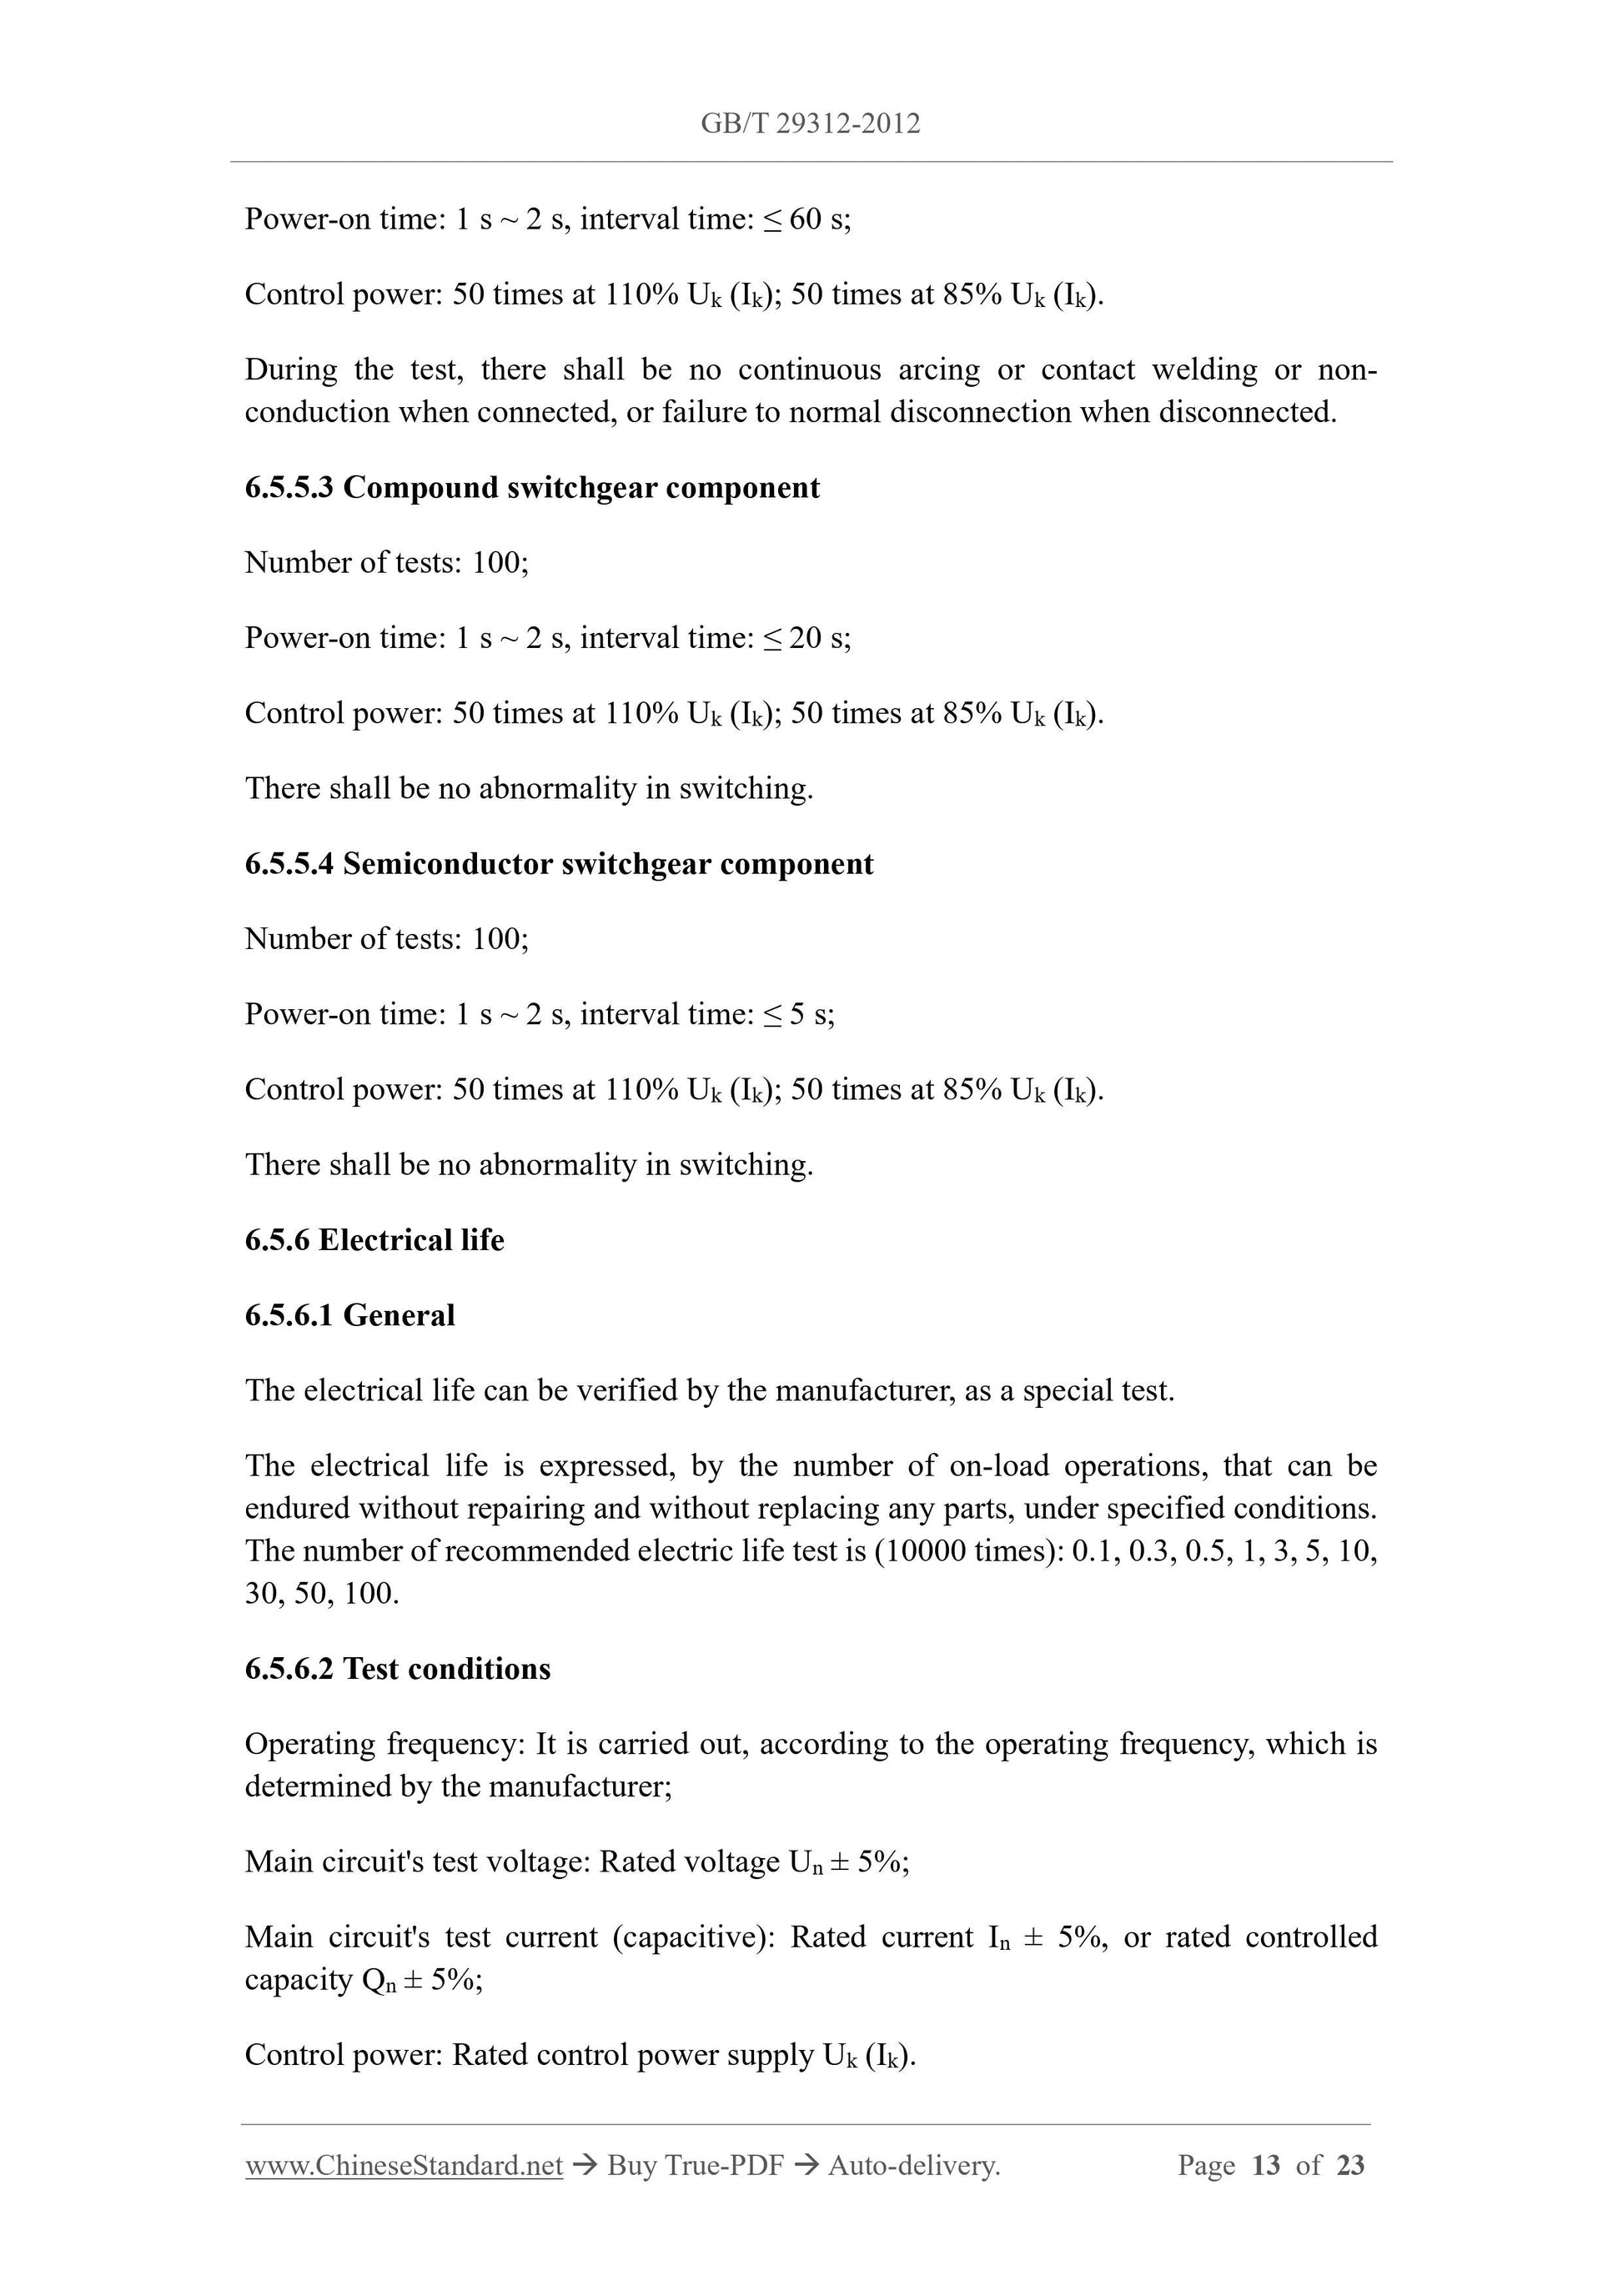 GB/T 29312-2012 Page 7